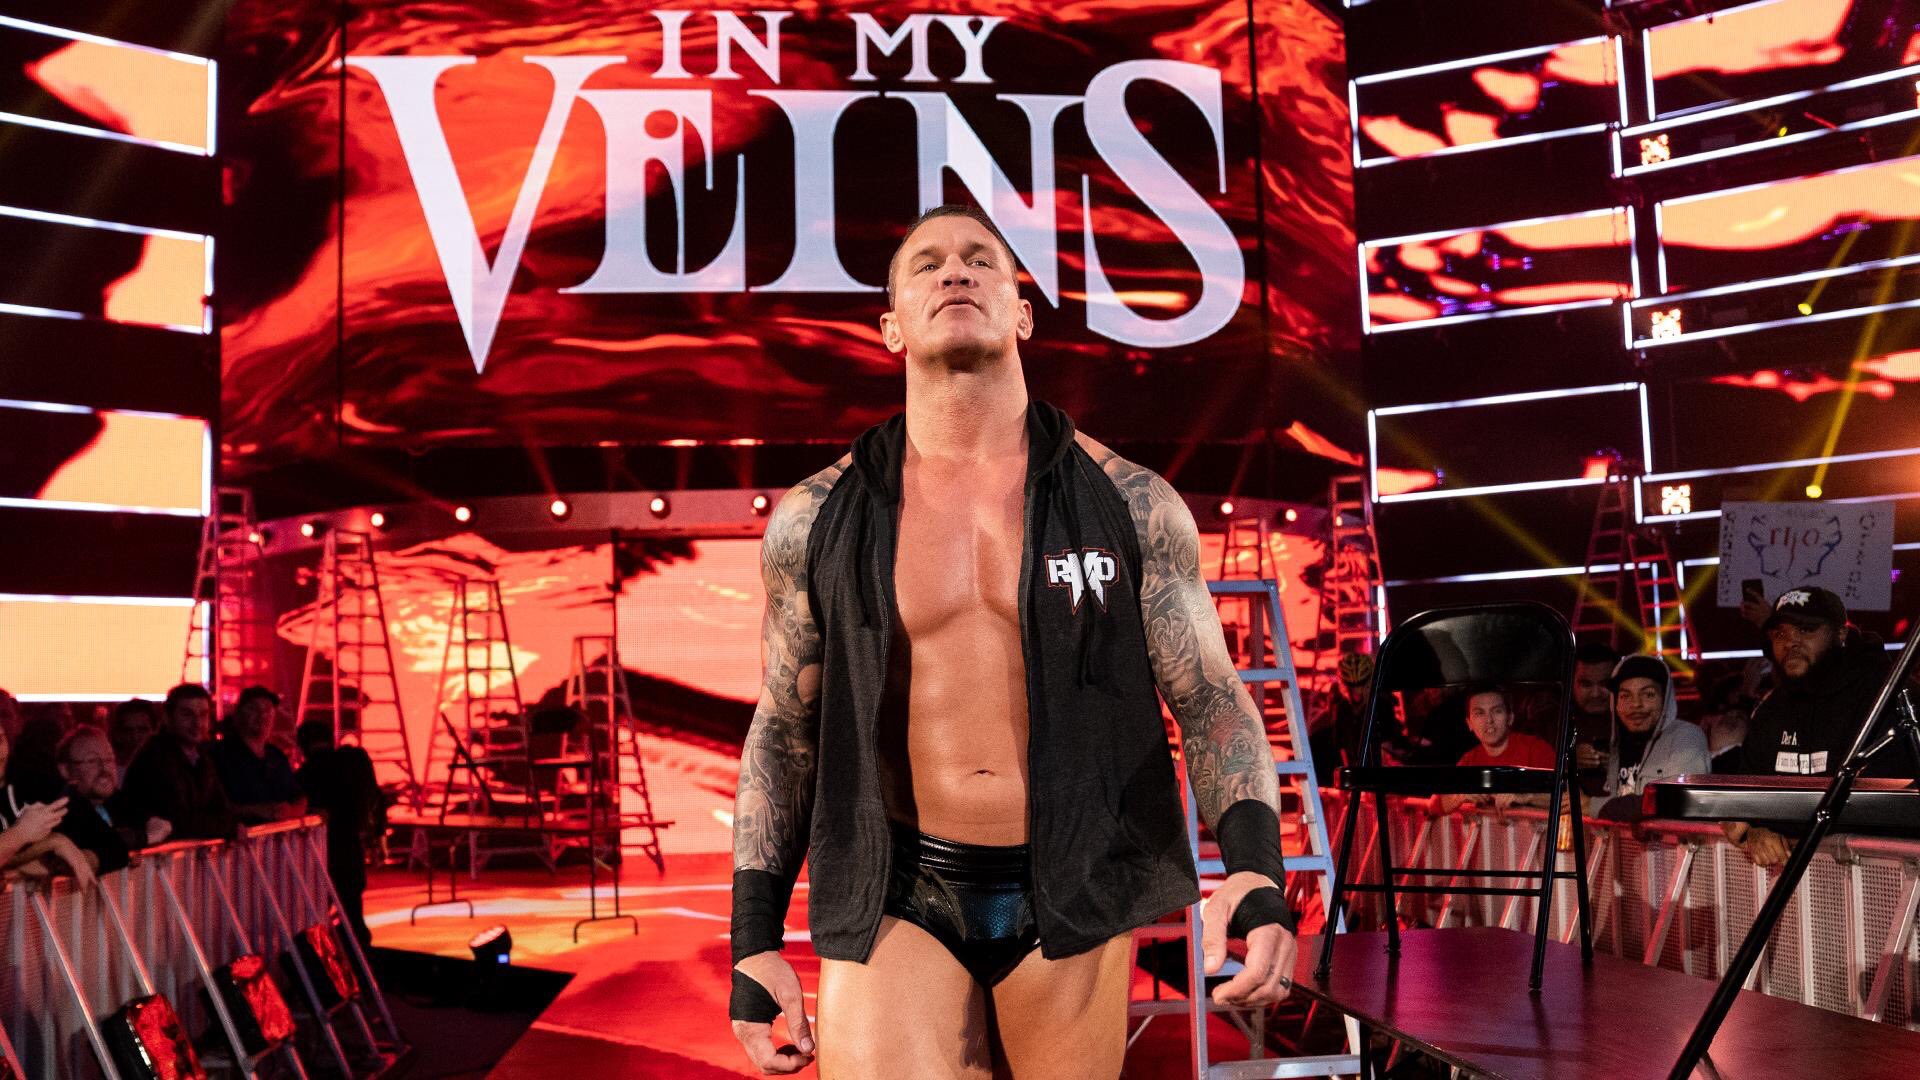 Happy birthday to my favorite wrestler of all time! Randy orton 